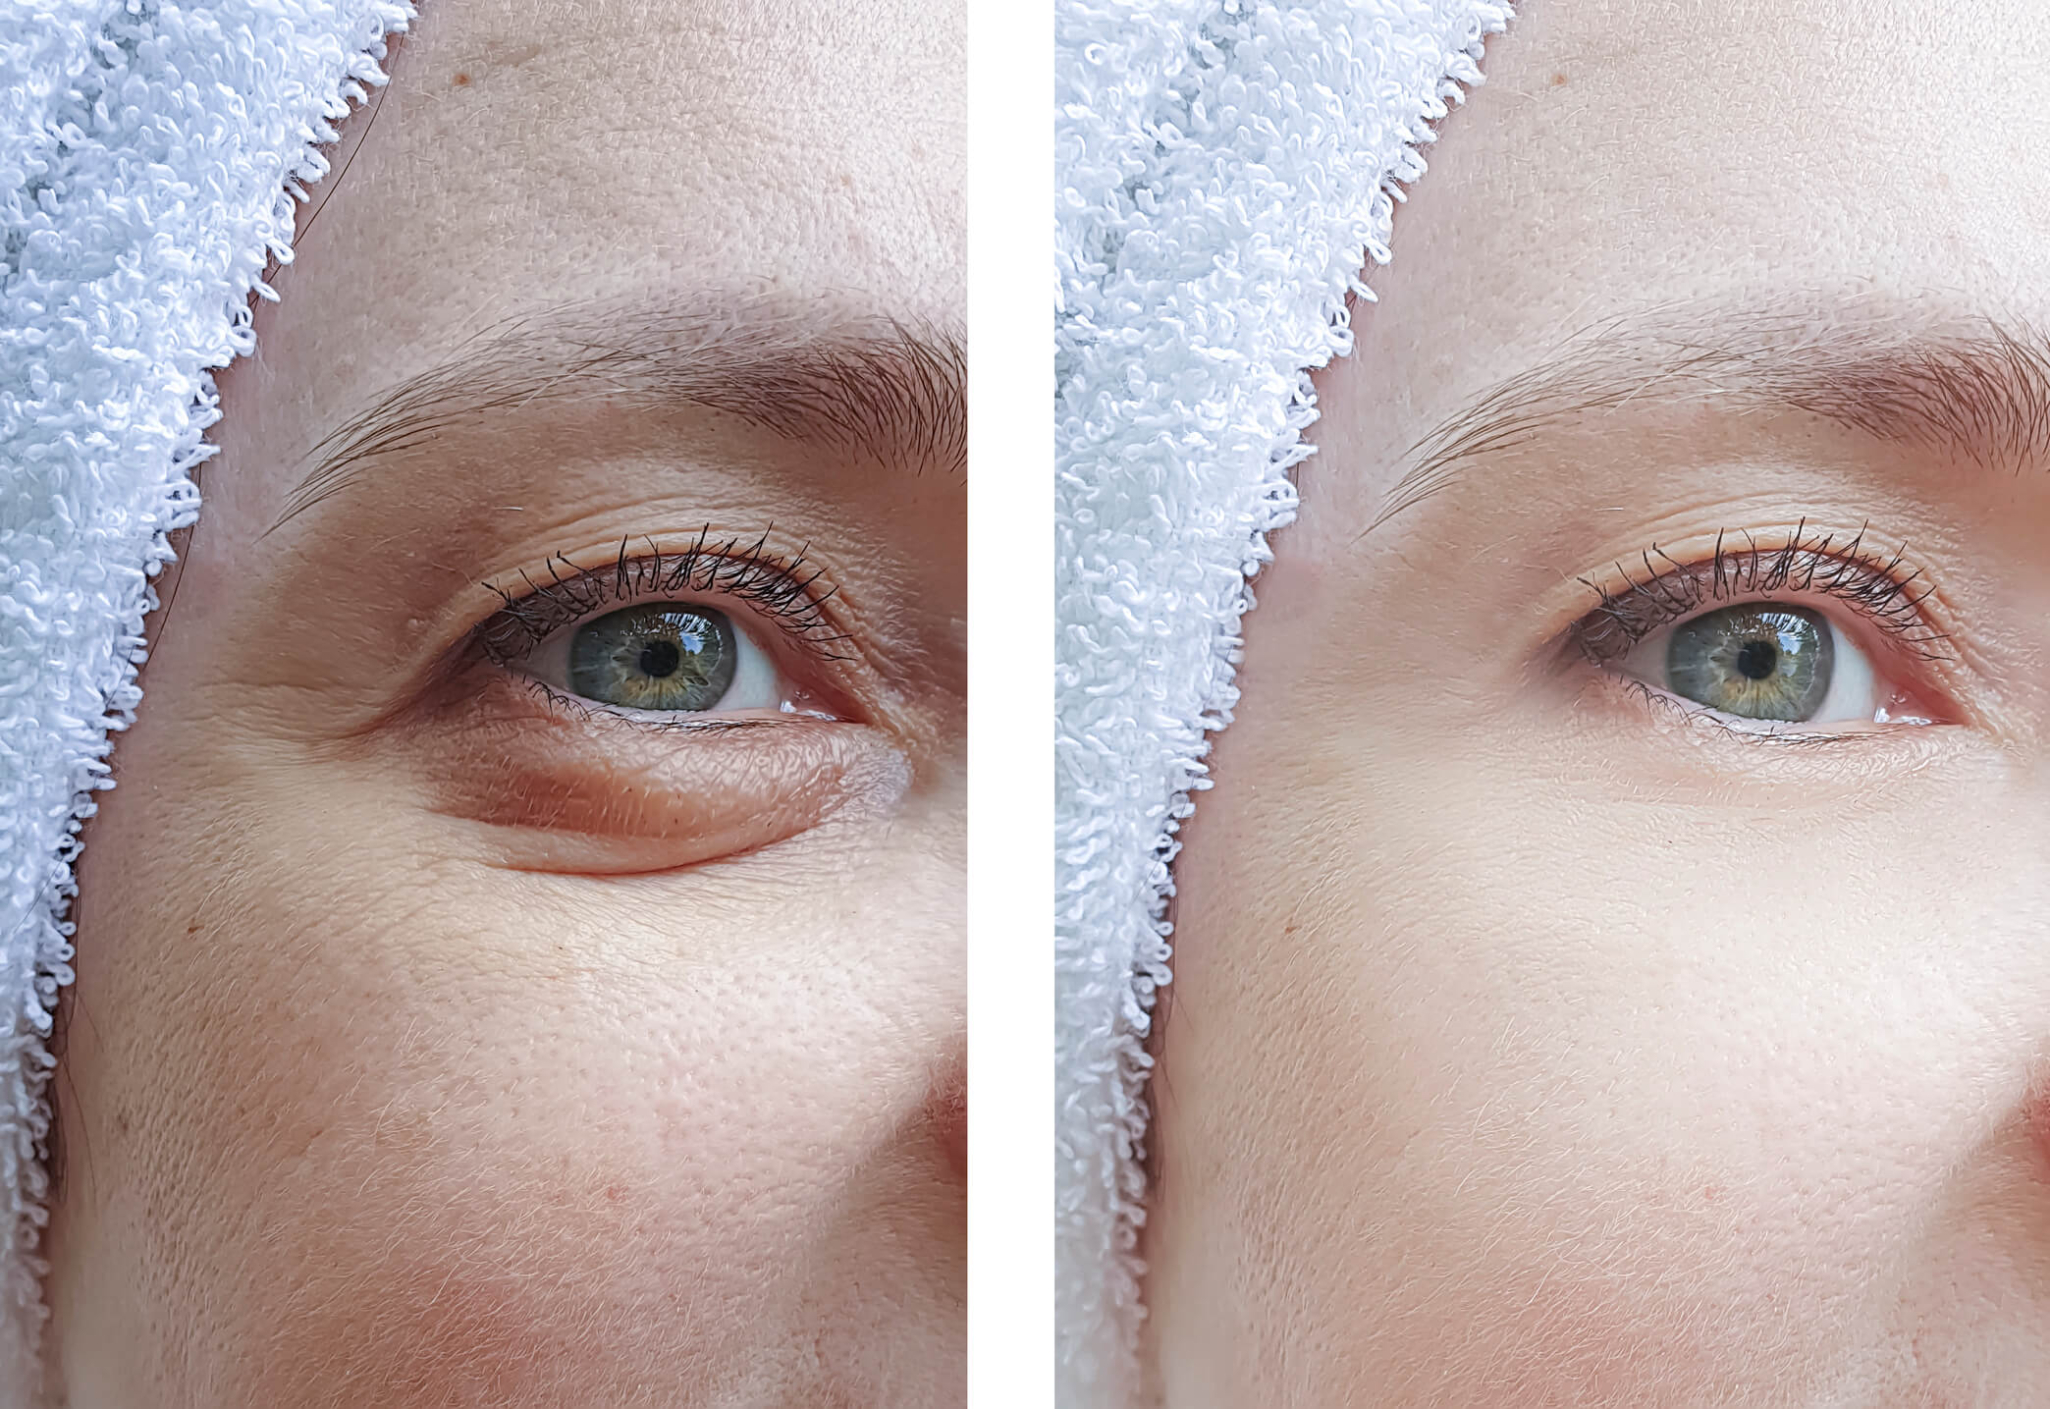 Bags Under Your Eyes? Causes & Treatments to Reduce Under-Eye Bags